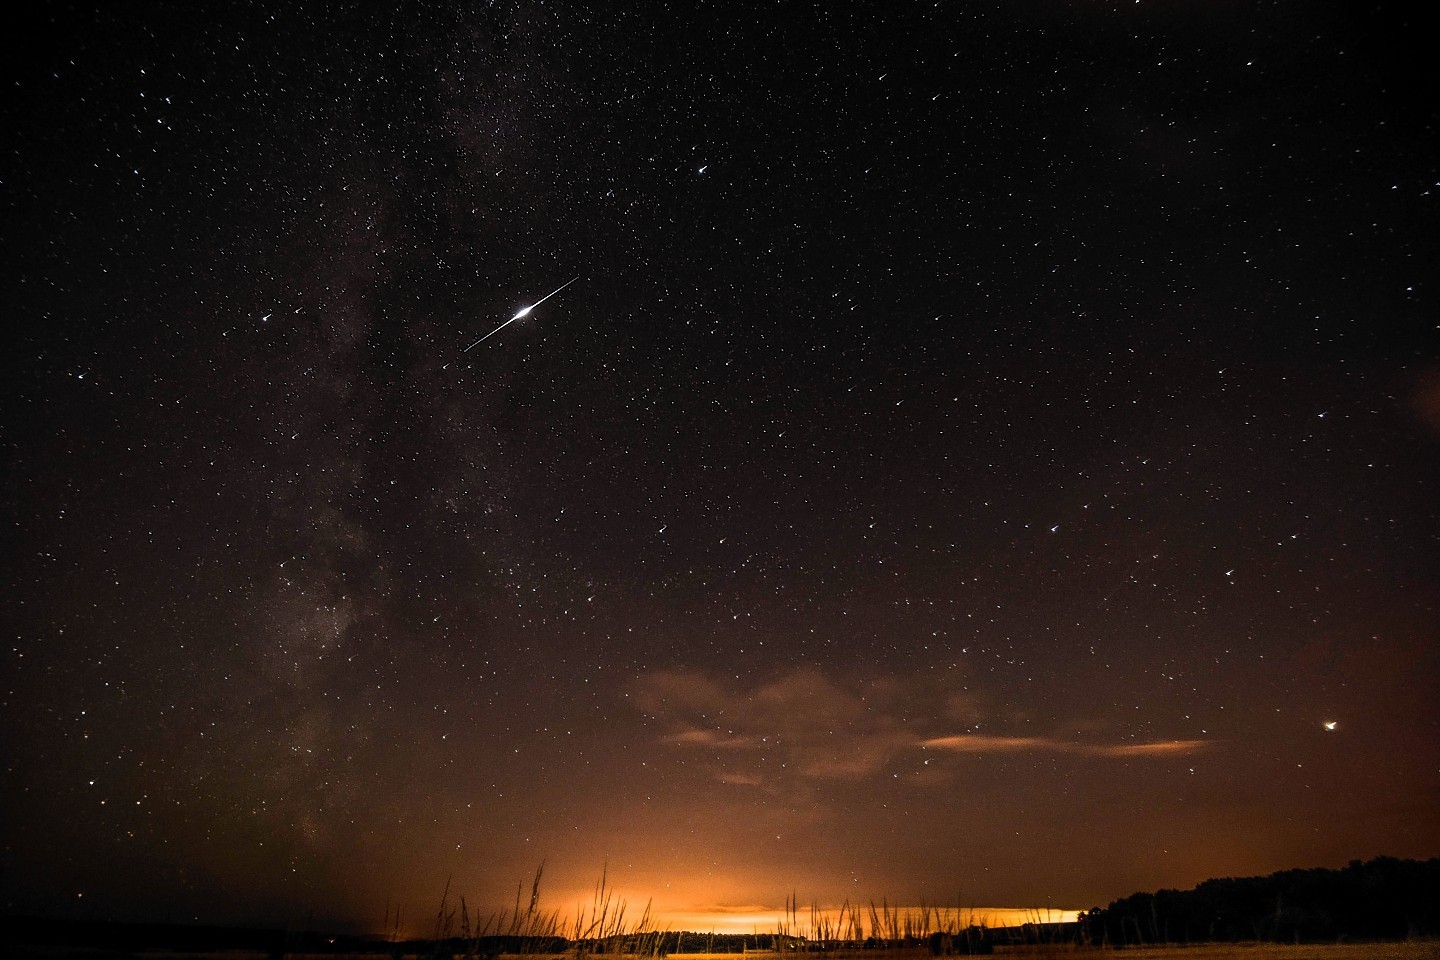 A meteor appears to pass through the Milky Way during the annual Perseid meteor shower, in Moray